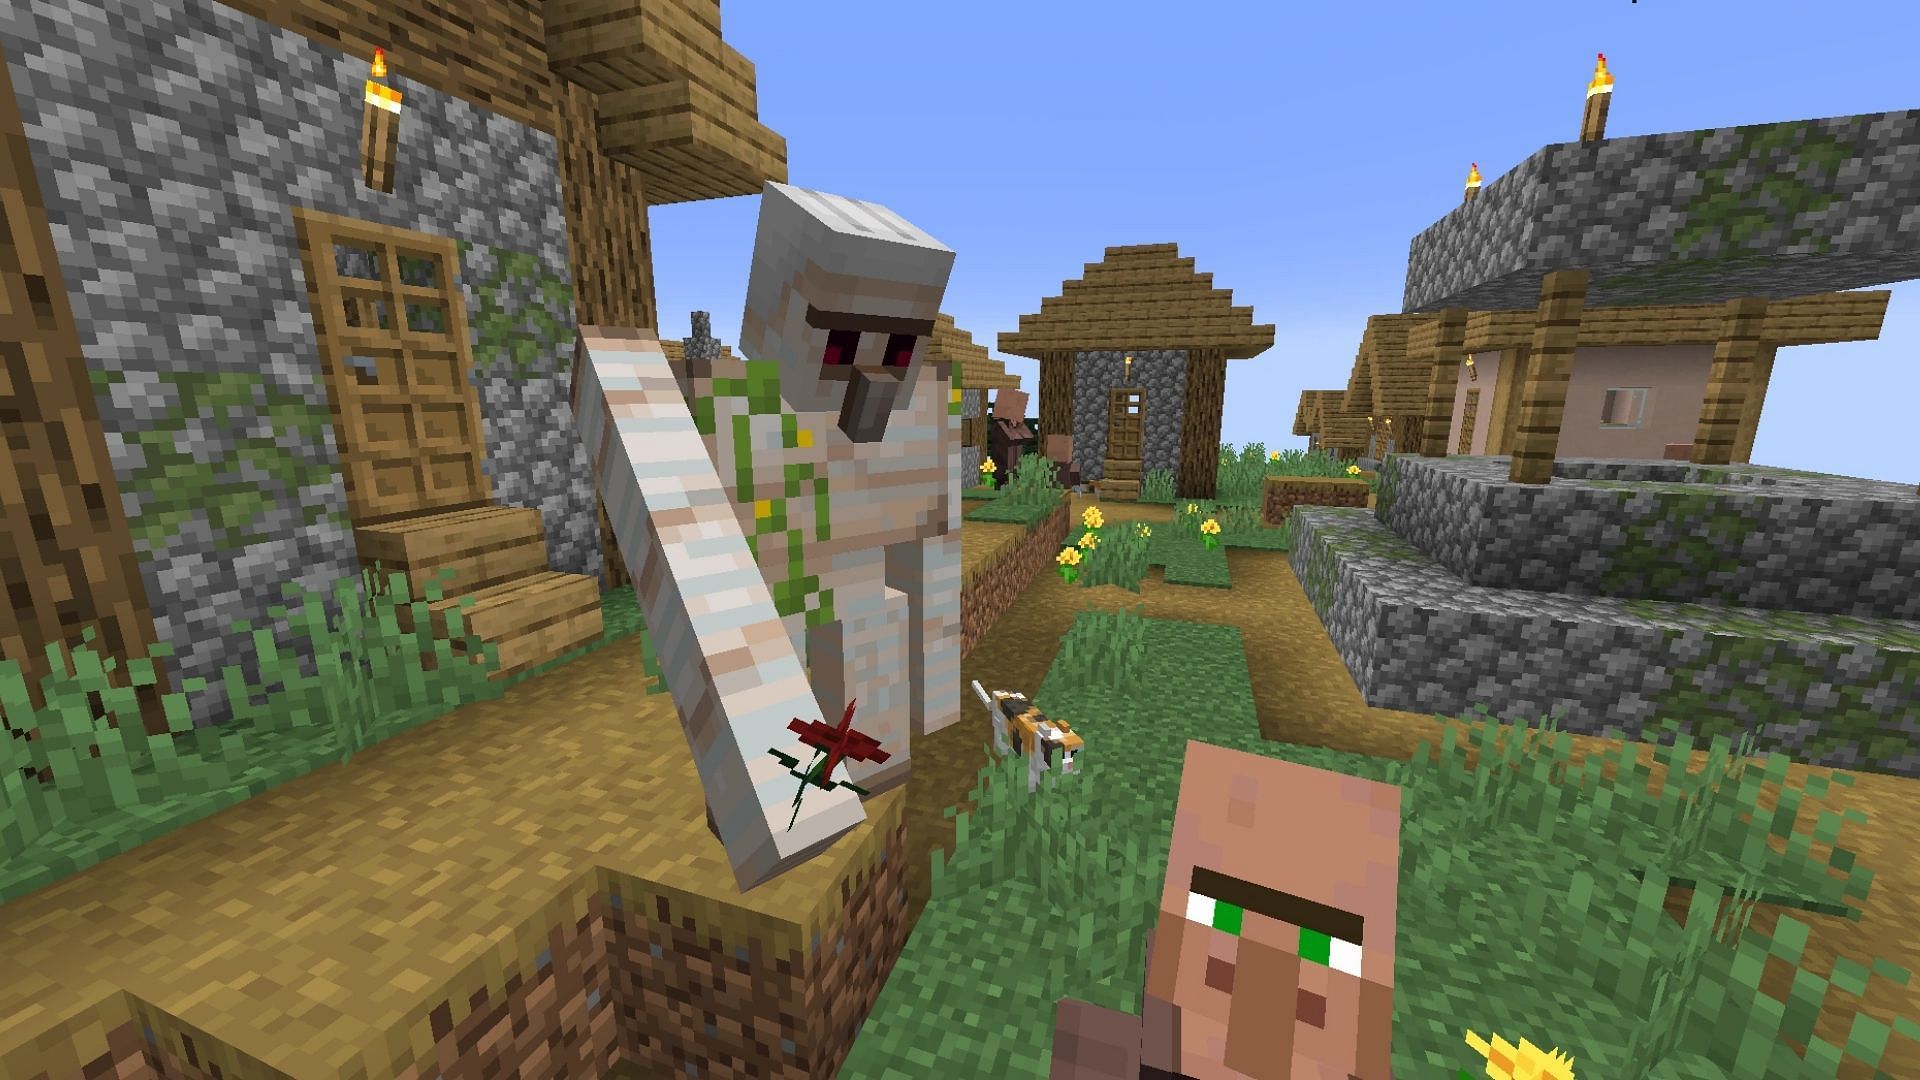 Iron Golem giving poppy to a villager in Minecraft (Image via Mojang)